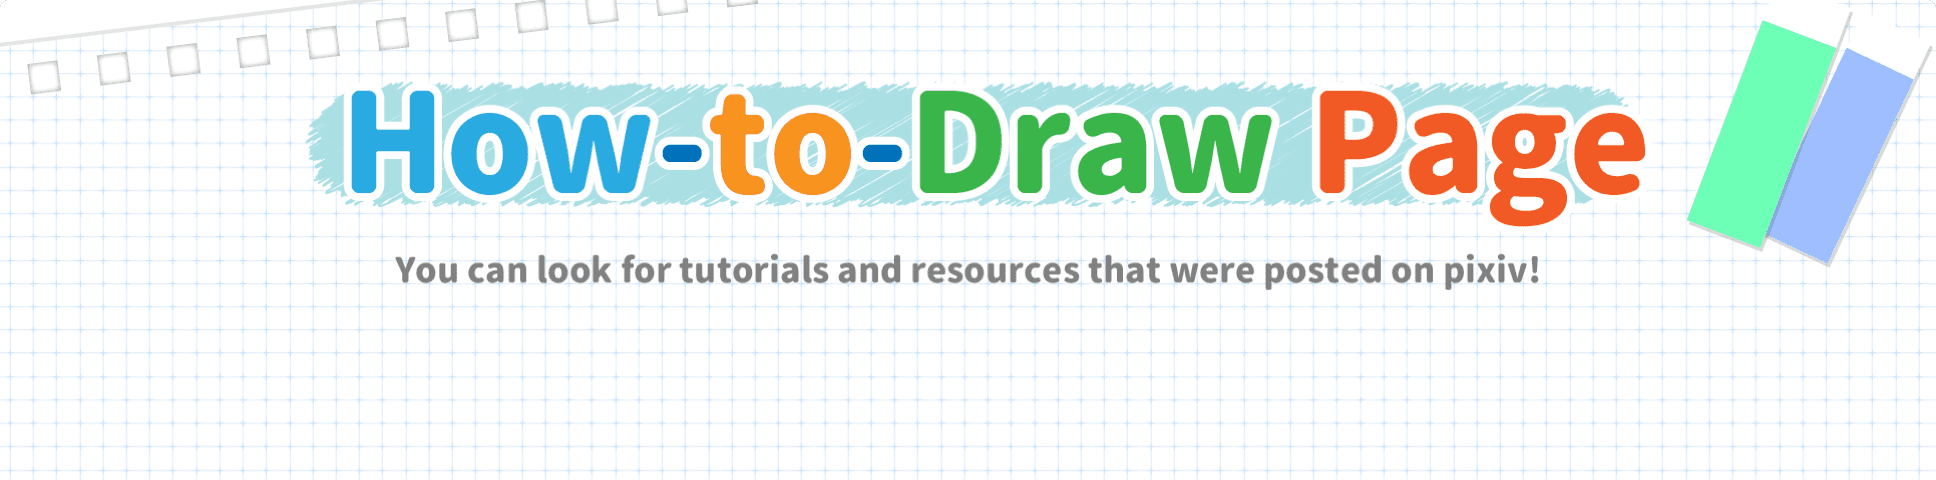 How to Draw Page